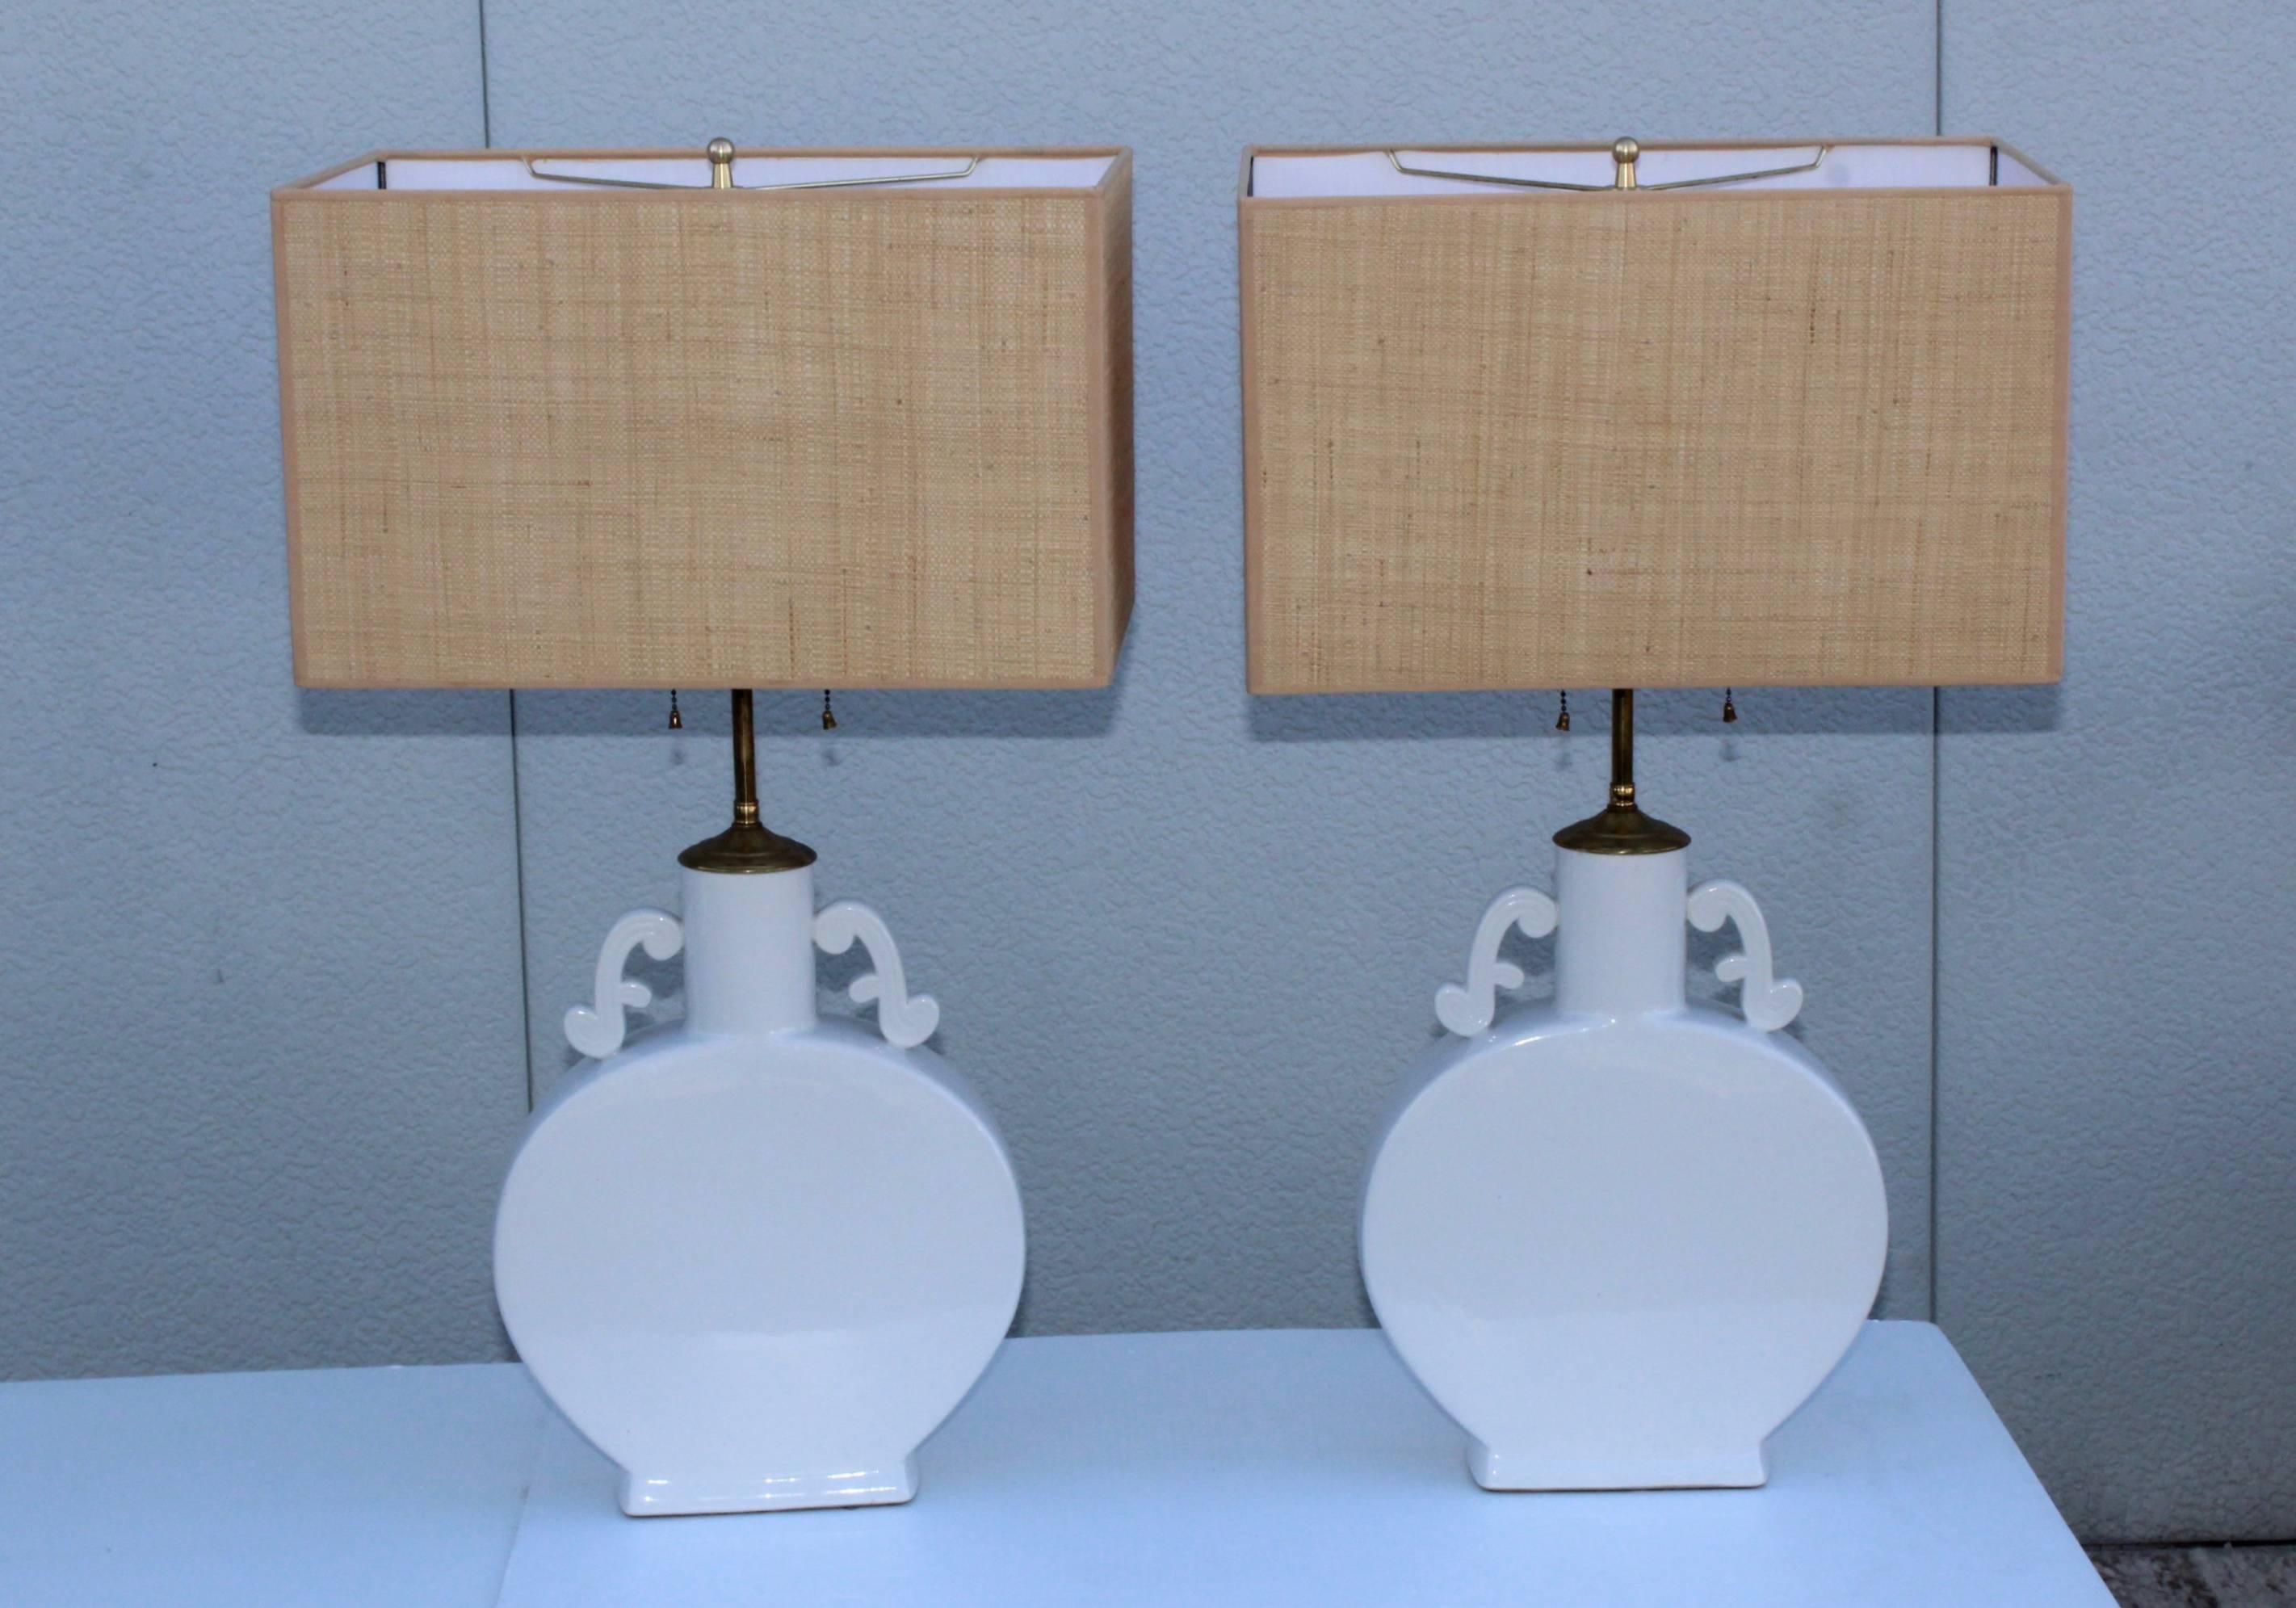 1960s Blanc De Chine table lamps with brass hardware.
The lamps have professionally rewired and are ready to use.

Shades for photography only.